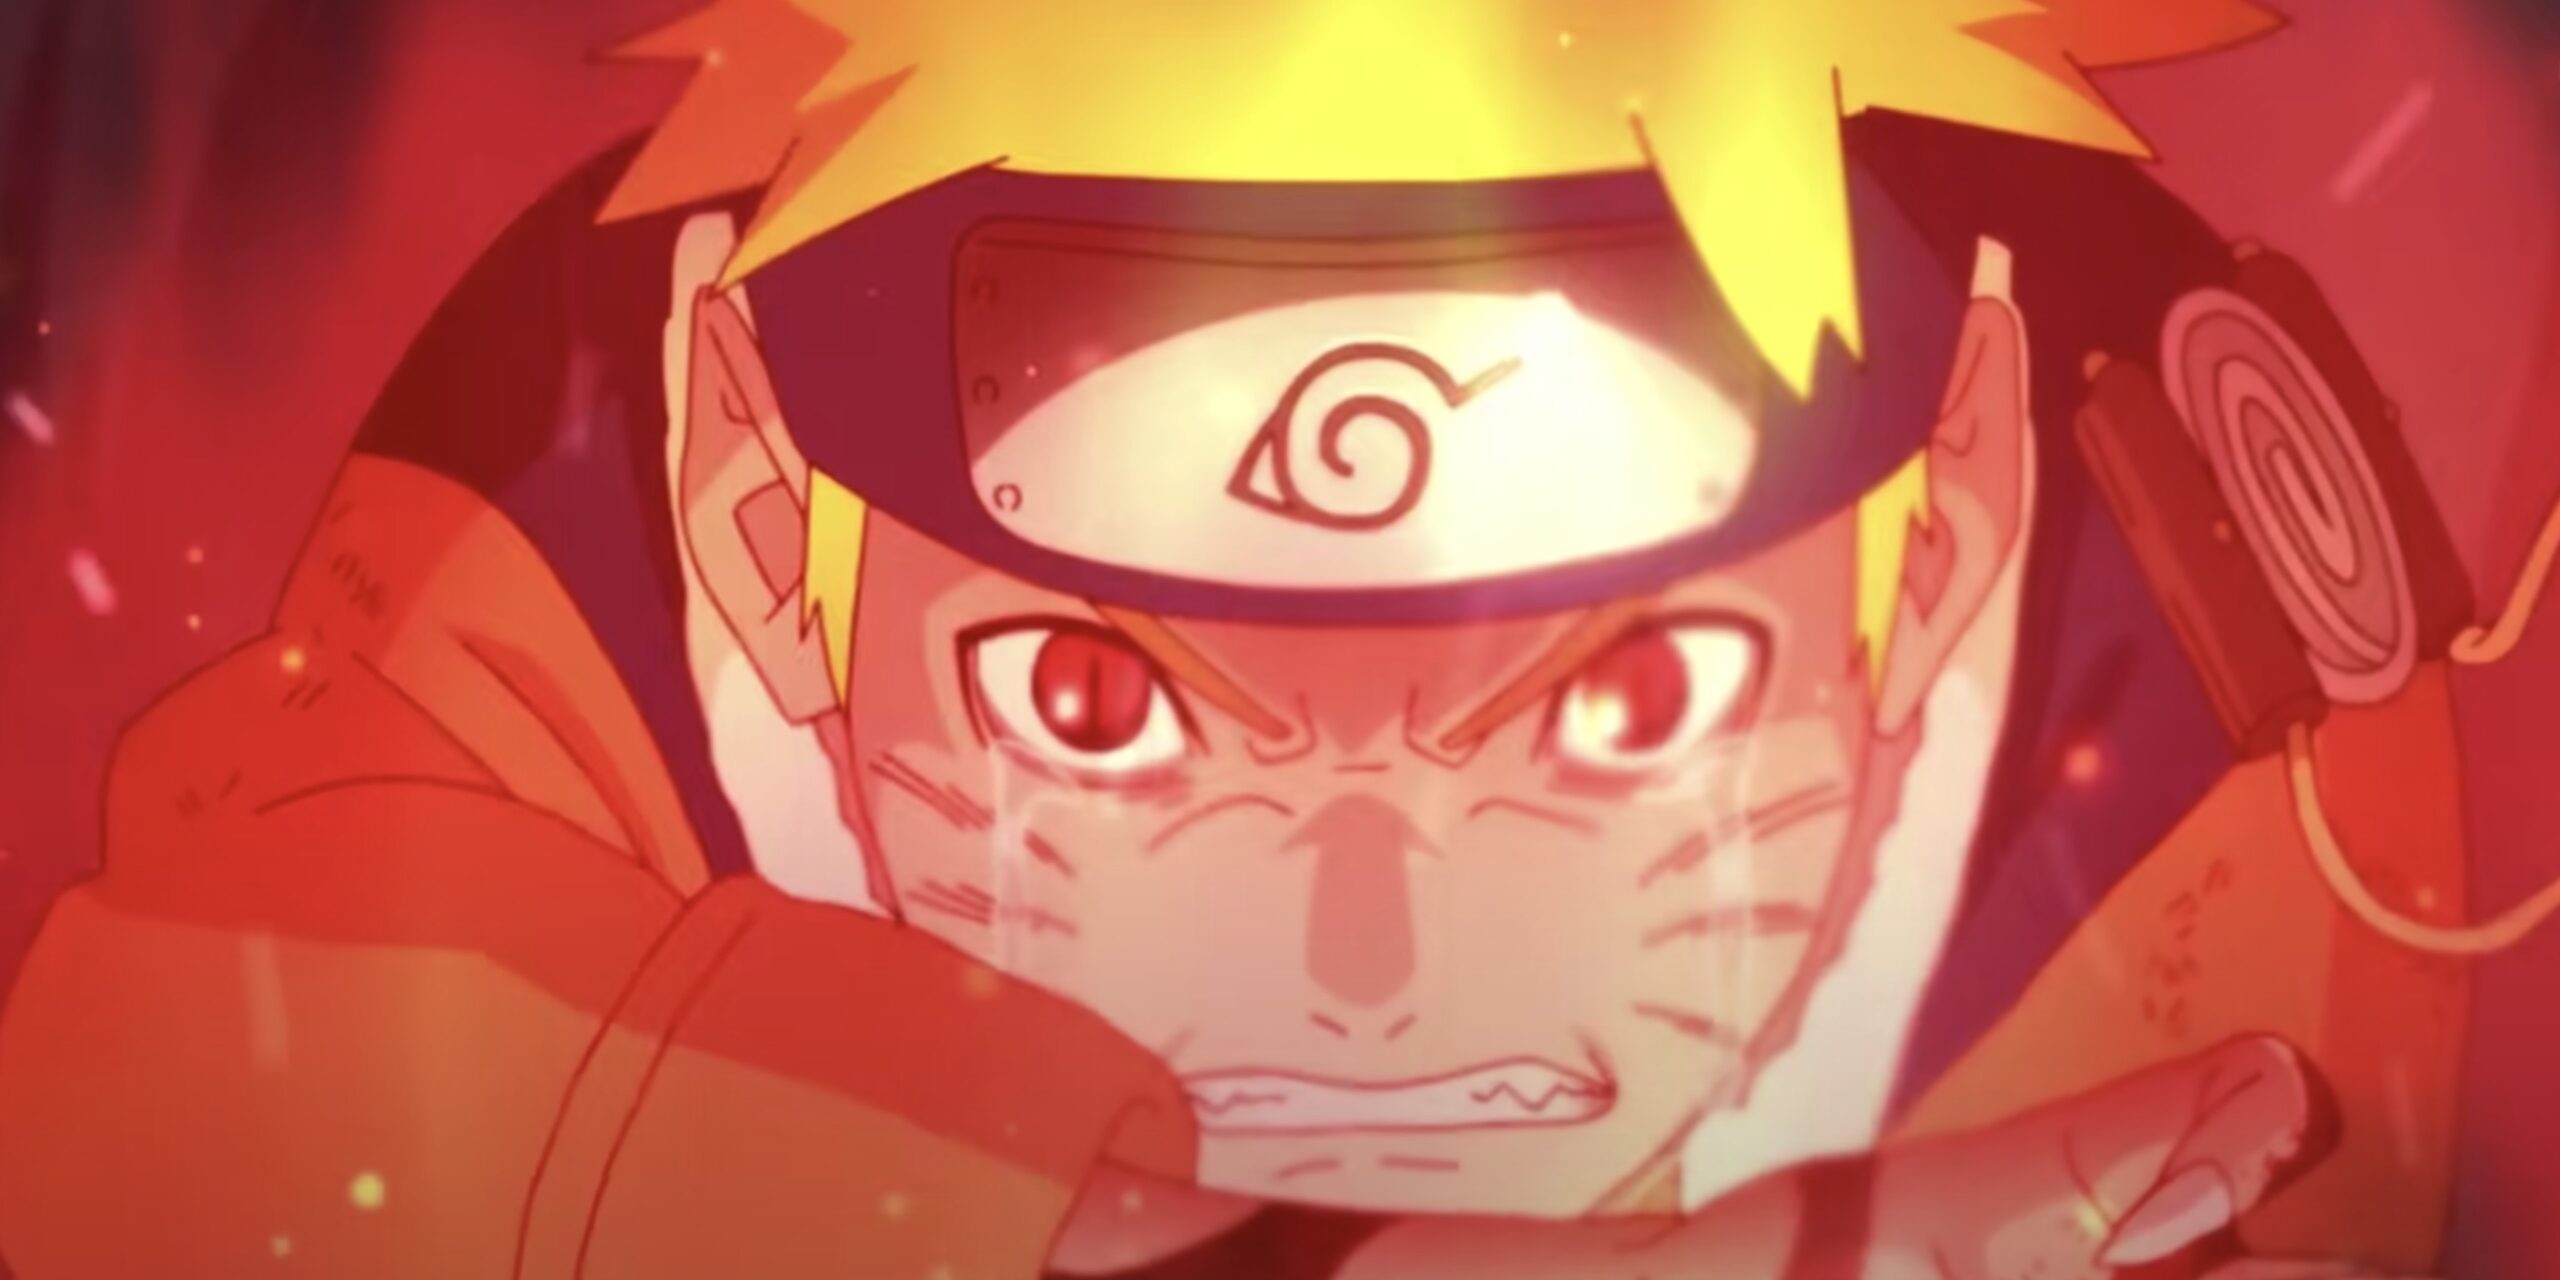 A Single Naruto Powerup Altered the Core Meaning of The Story